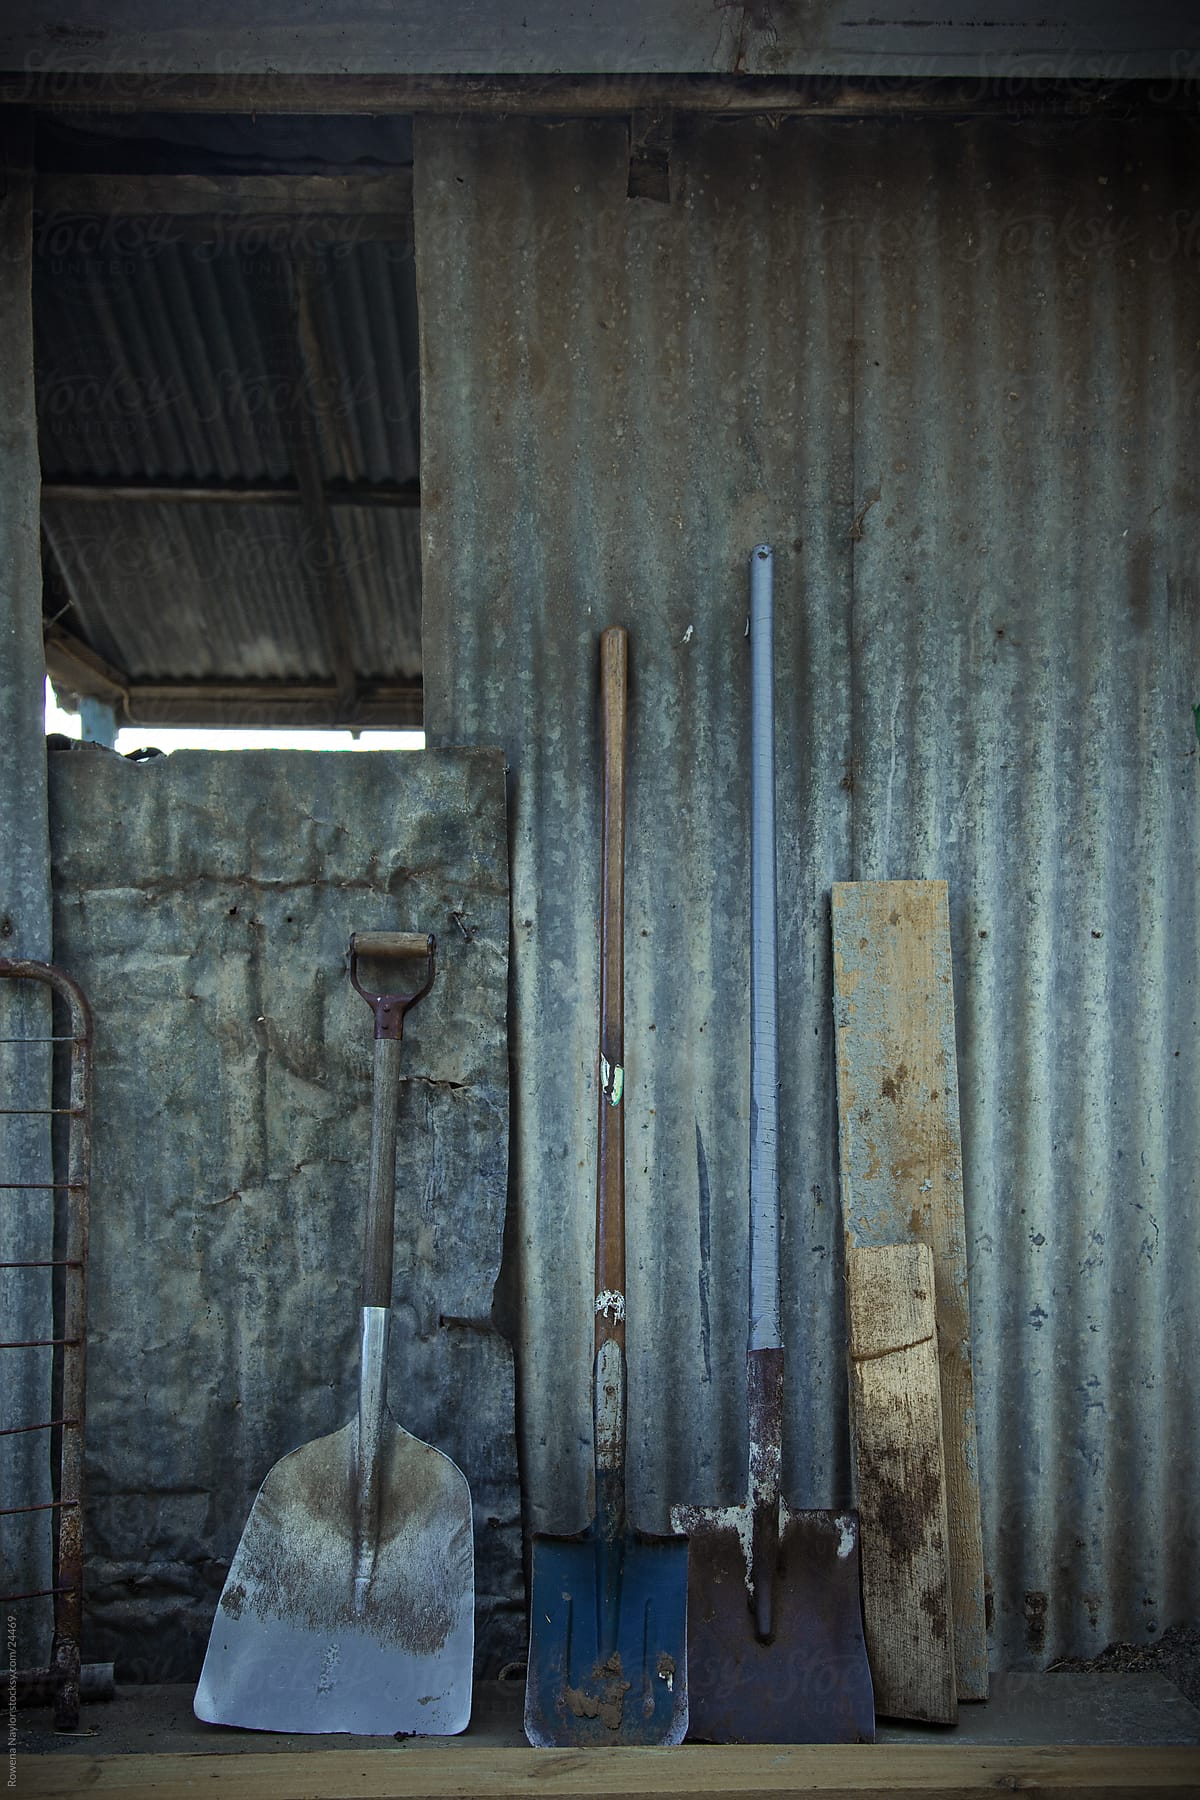 Rustic farm tools against a tin shed